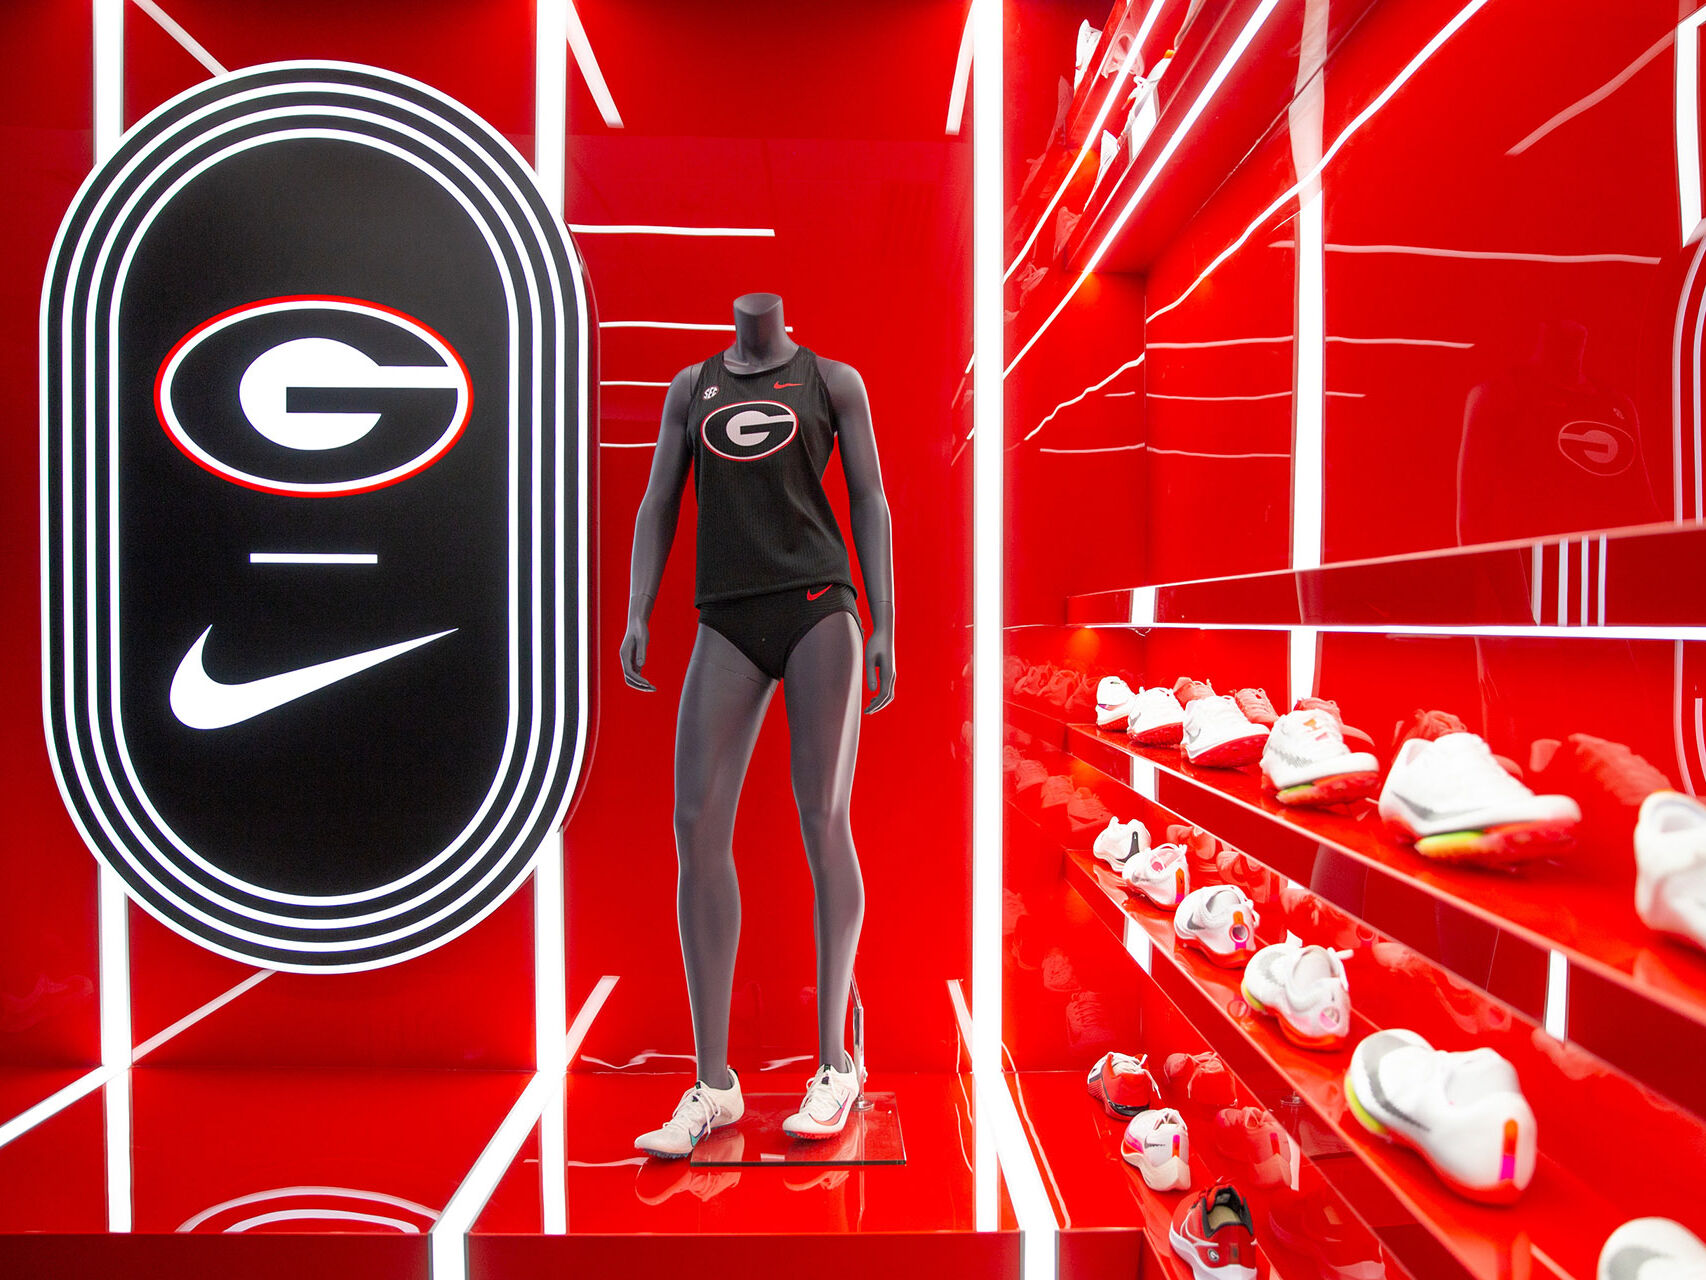 University of Georgia Track and Field Athlete Gear Display